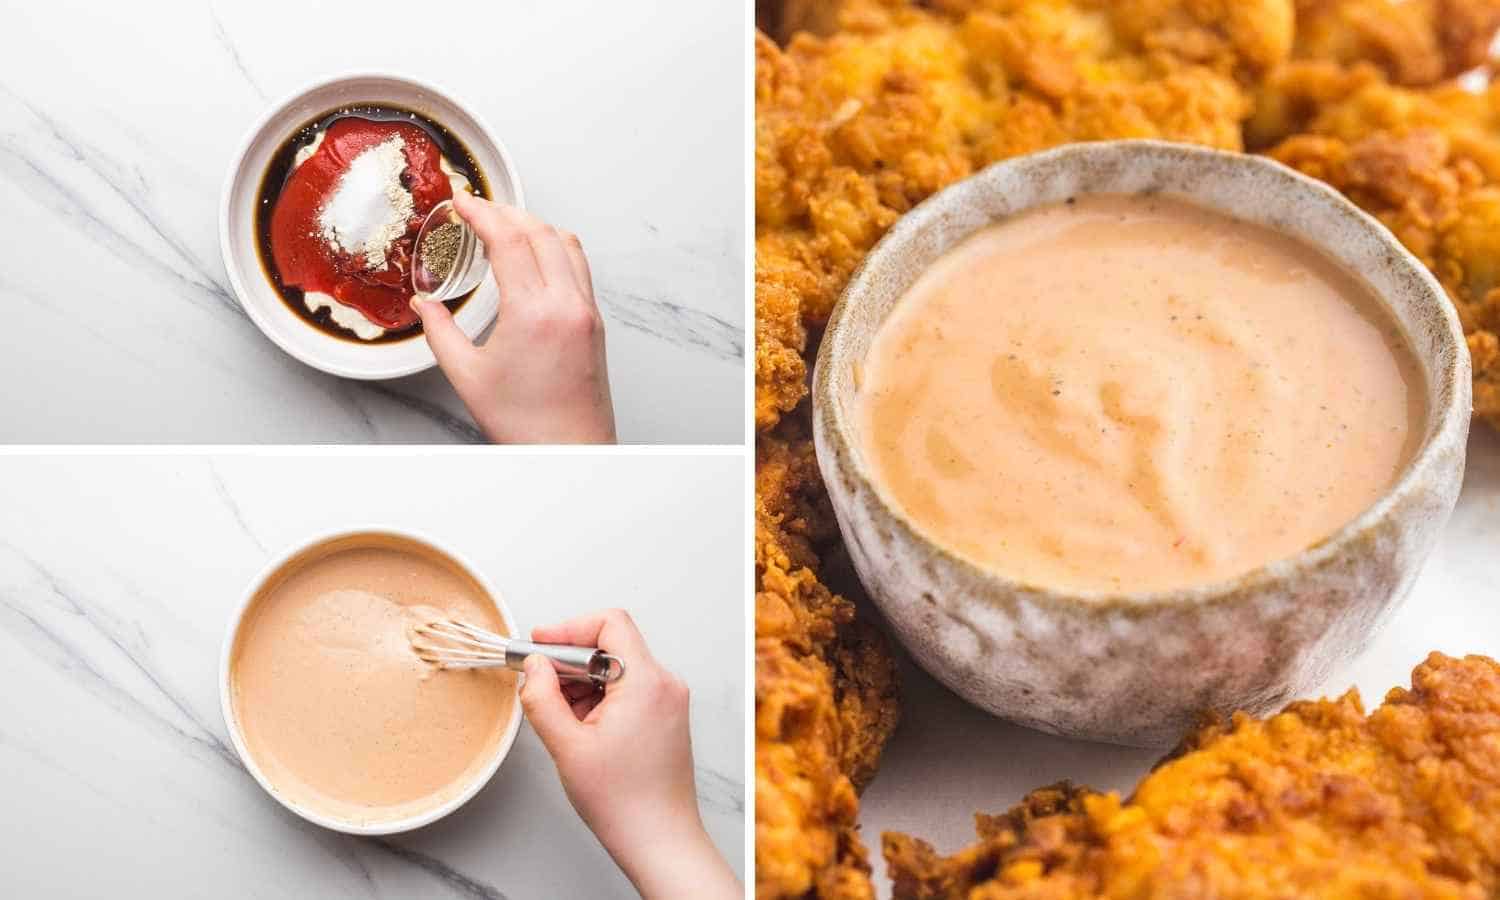 How to make canes sauce, a collage with 3 images